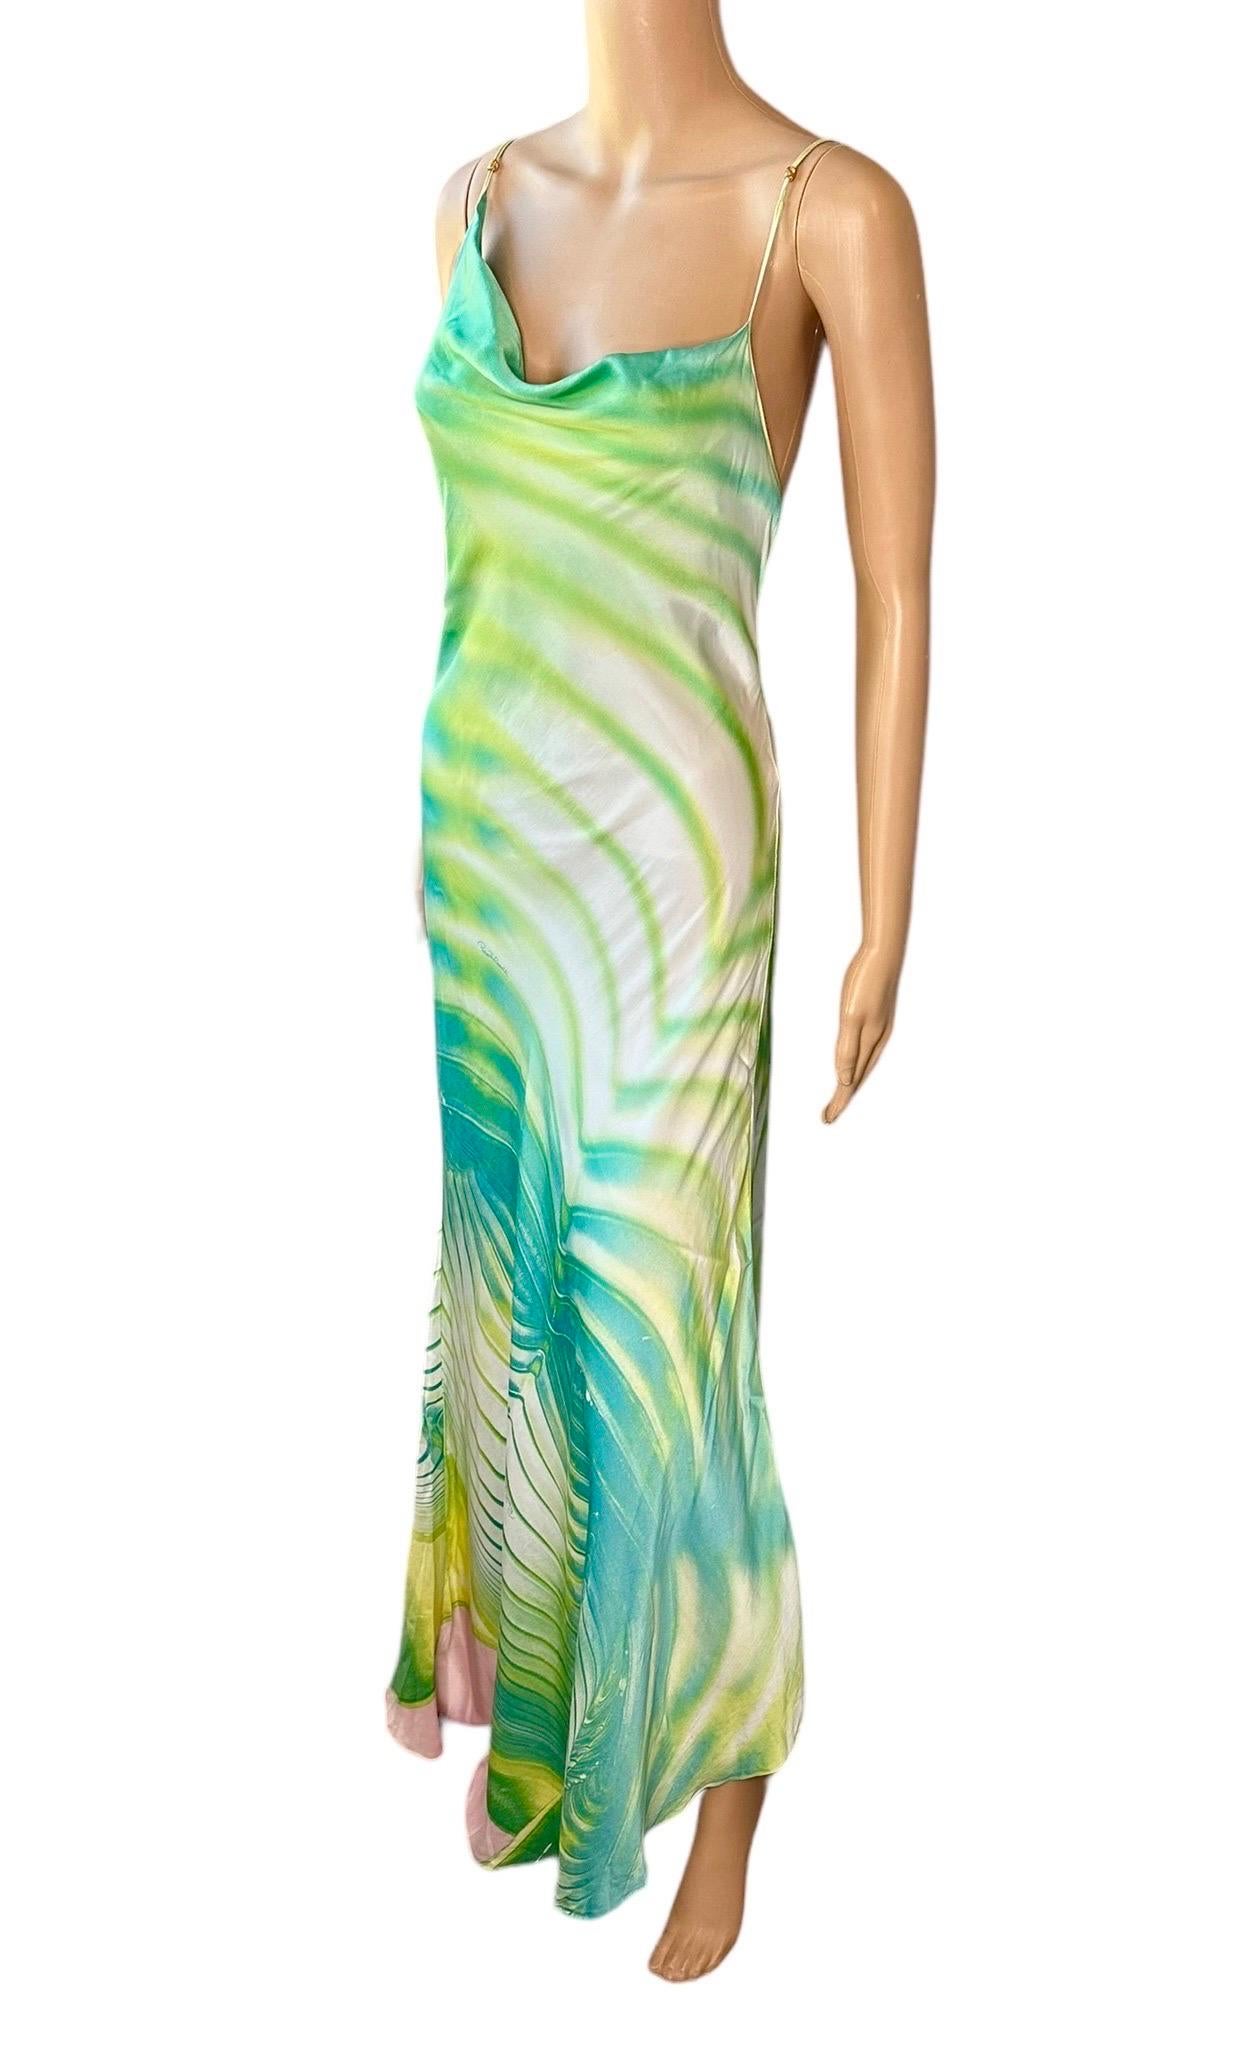 Roberto Cavalli S/S 2001 Psychedelic Print Silk Slip Maxi Evening Dress Gown For Sale 4